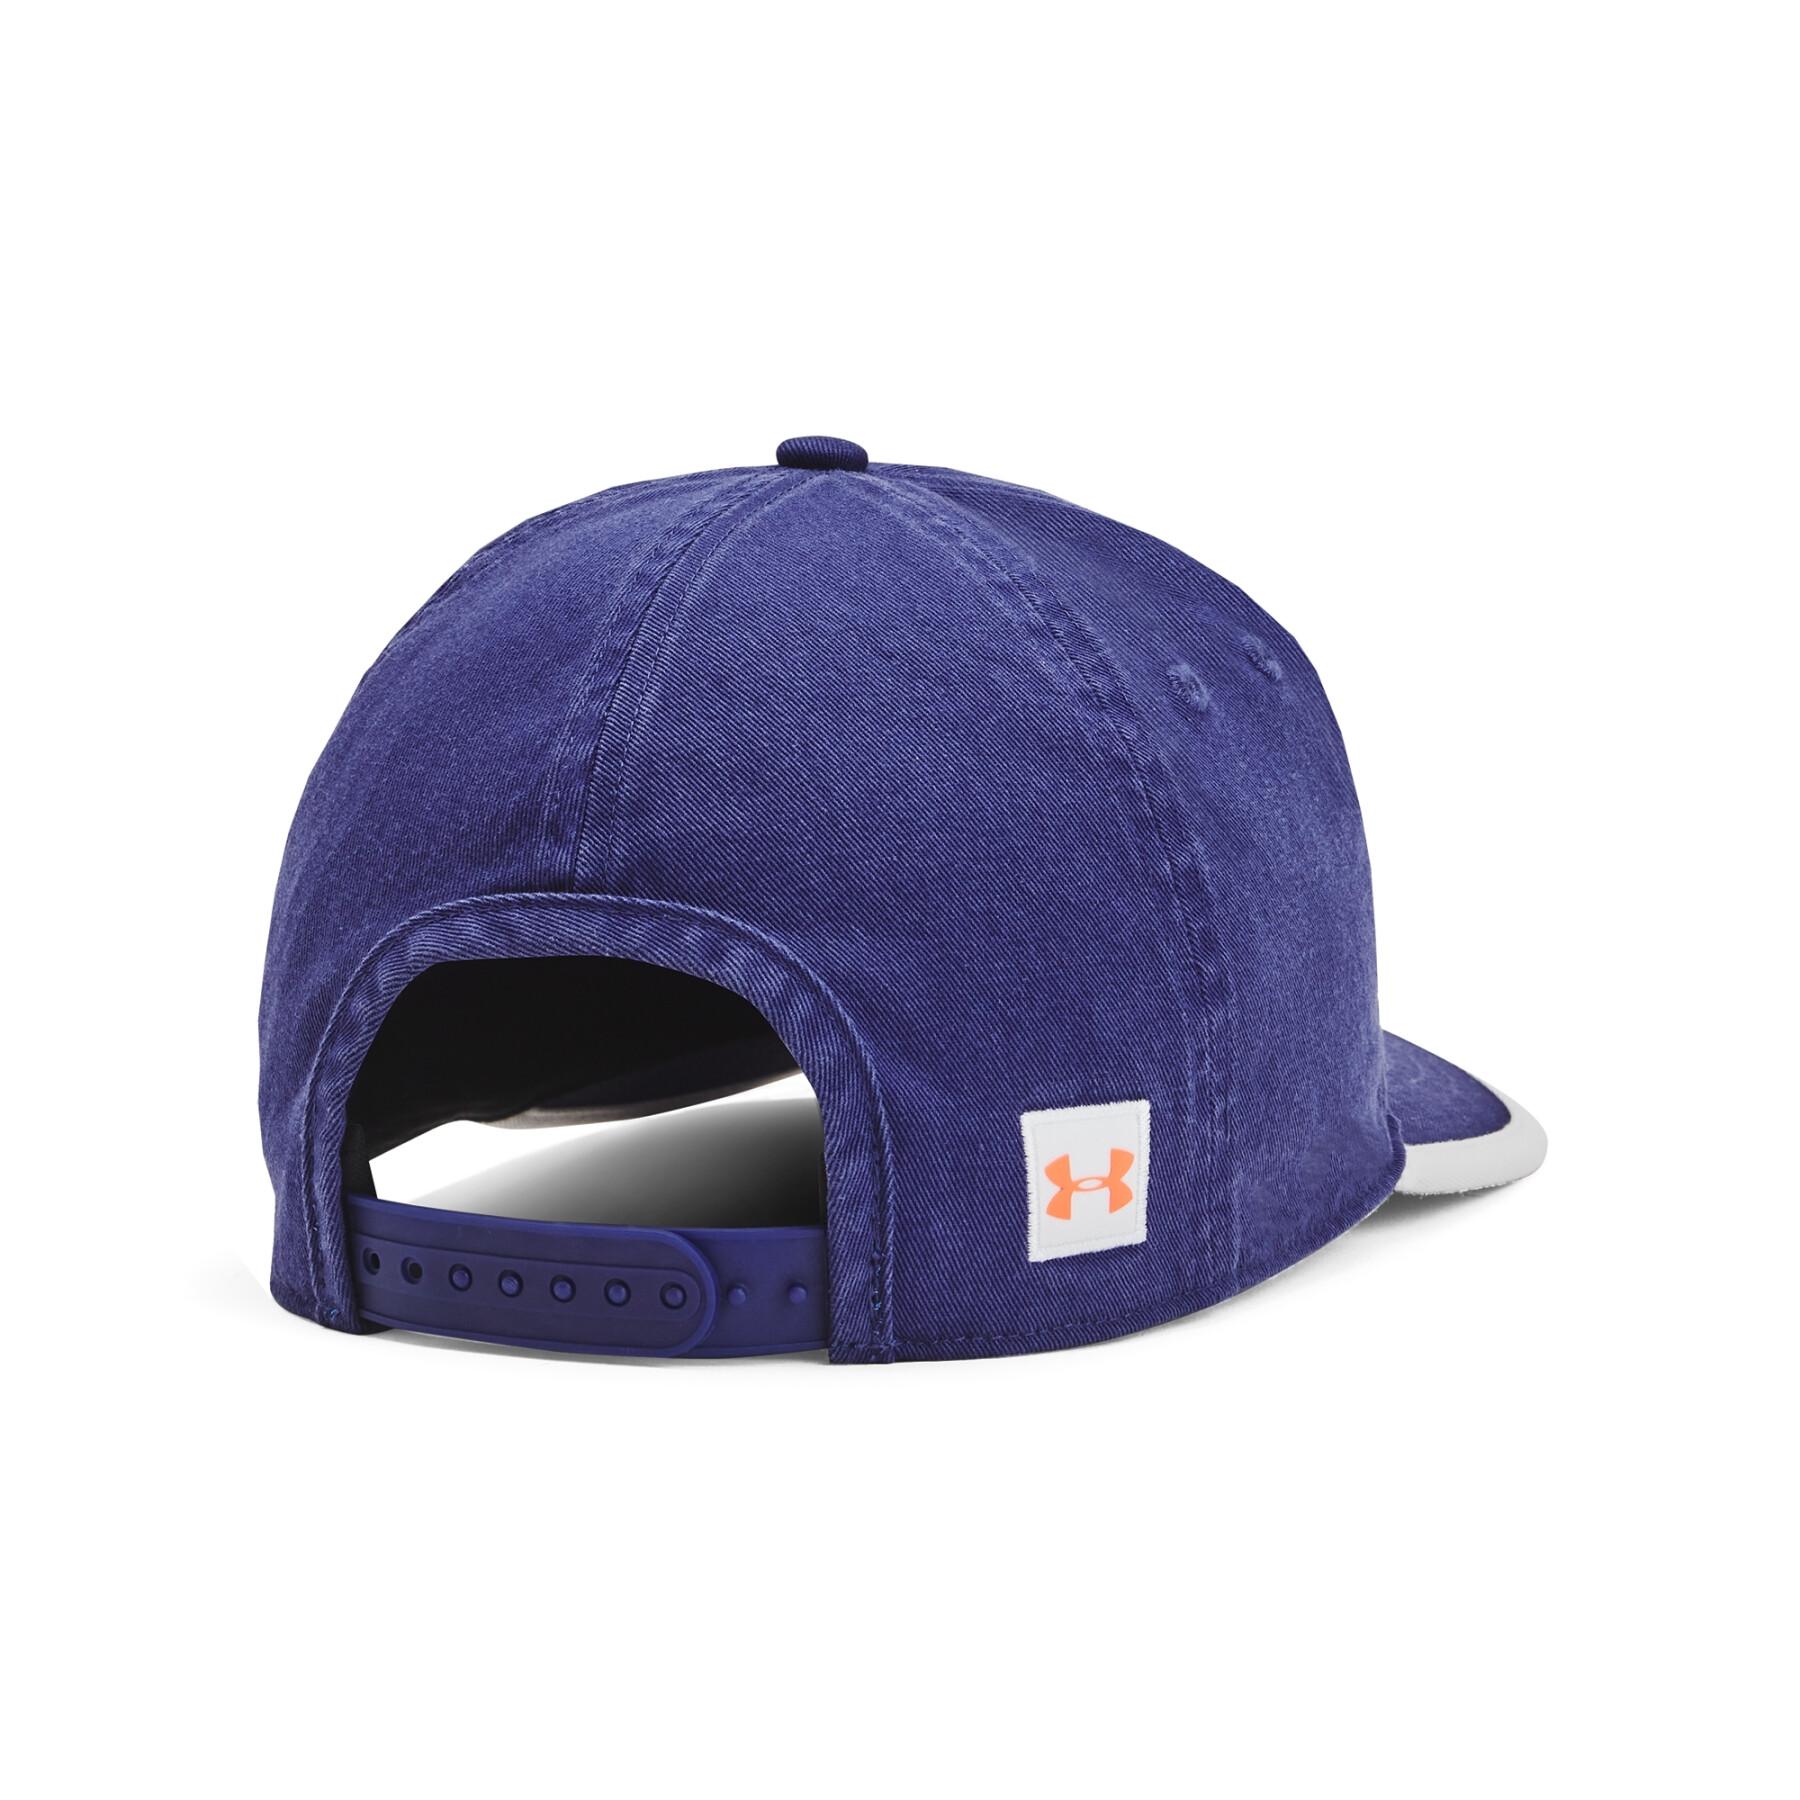 Snapback-keps Under Armour